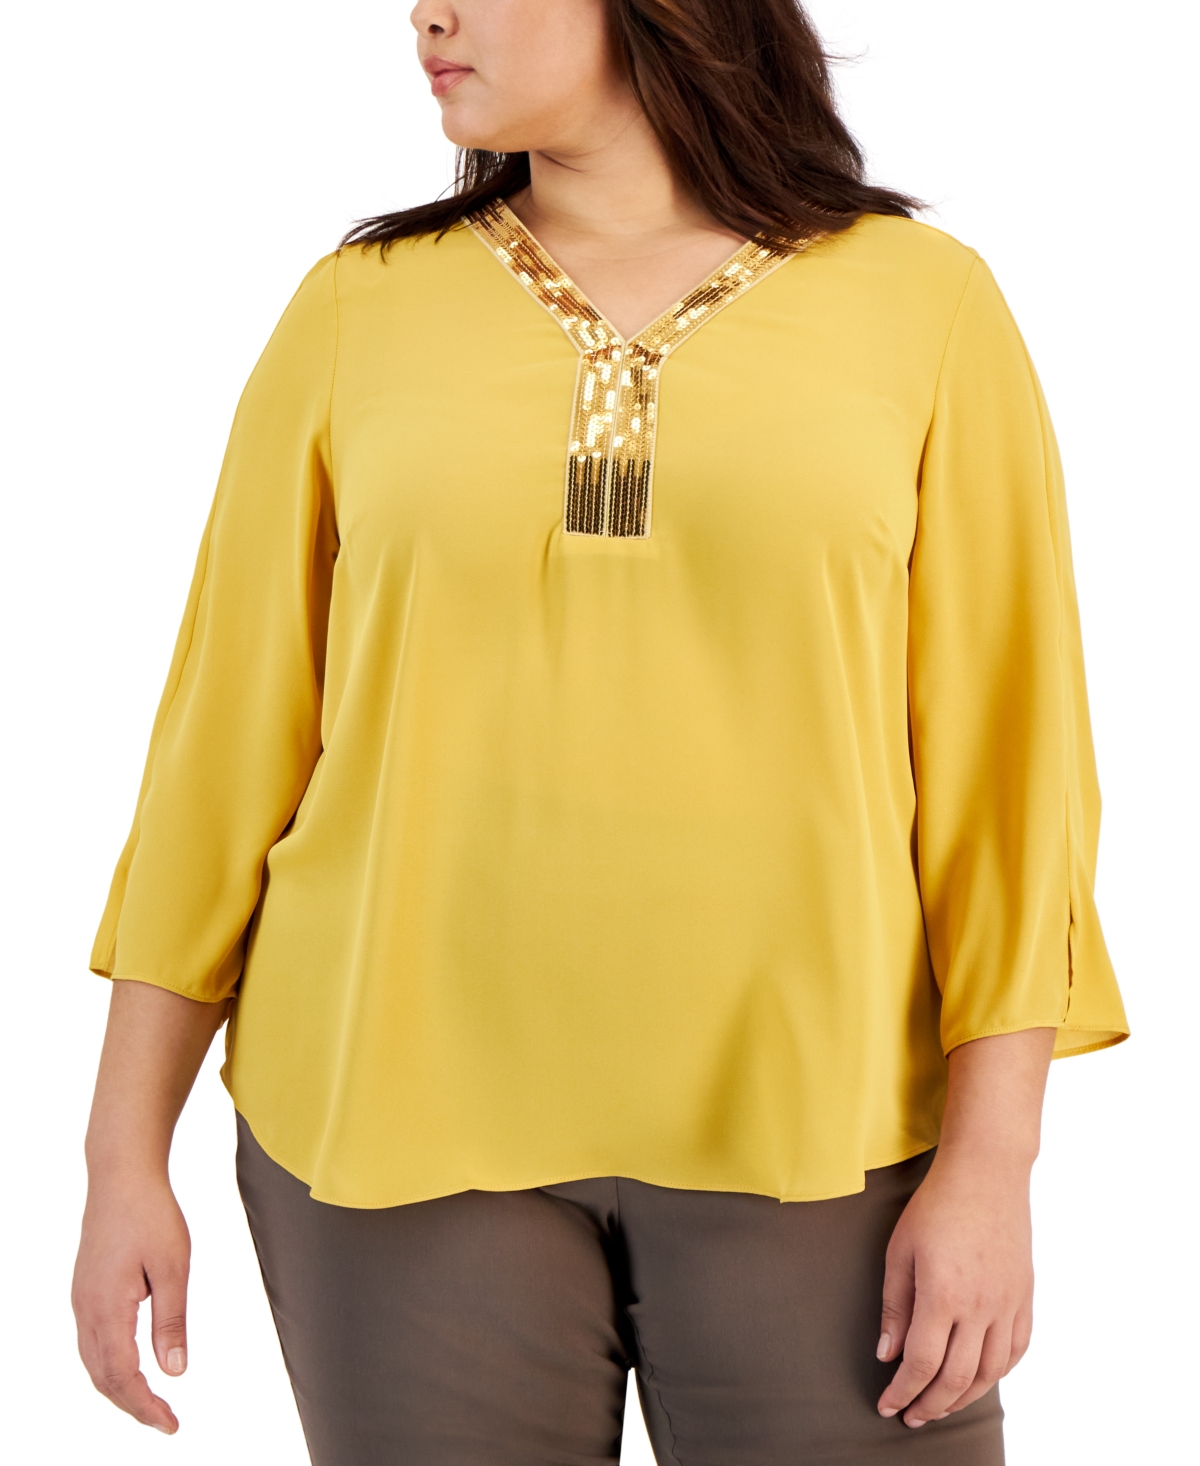 Plus Size Sequined-Neck 3/4-Sleeve Top, Created for Macy's - Saffron Gold